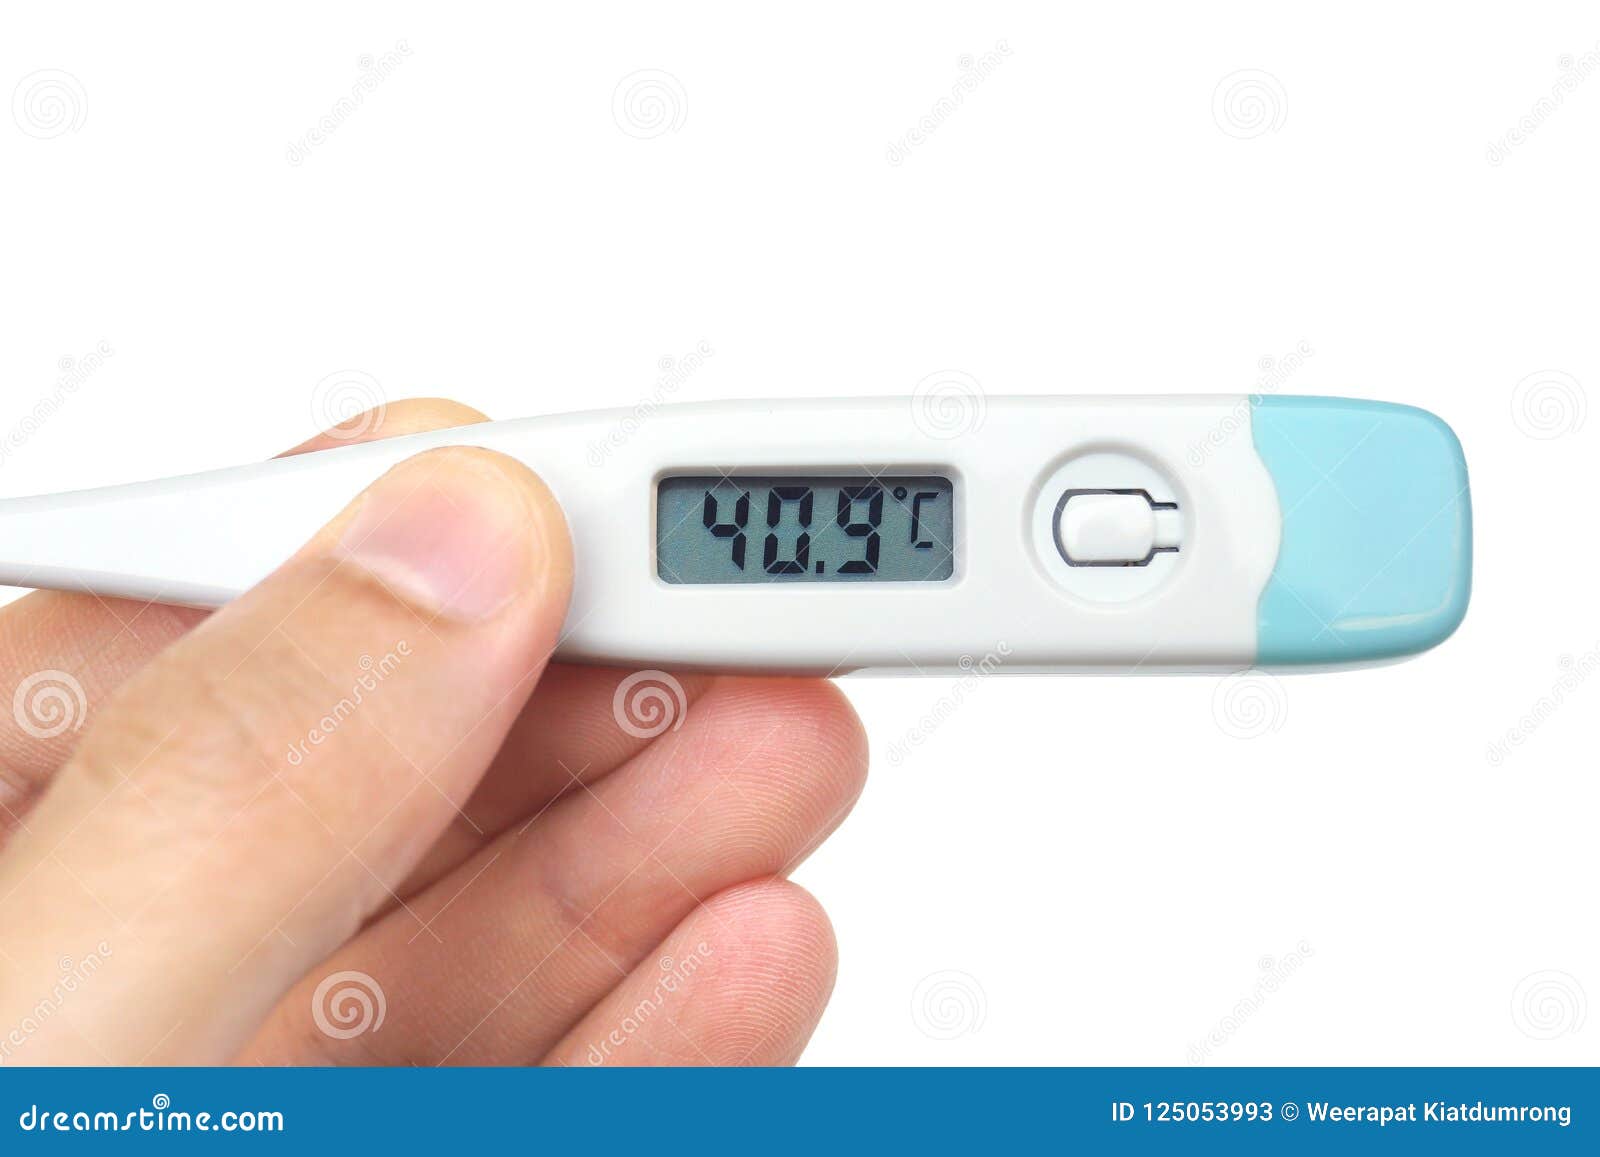 https://thumbs.dreamstime.com/z/thermometer-high-fever-temperature-closeup-hand-holding-thermometer-high-fever-temperature-isolated-white-125053993.jpg